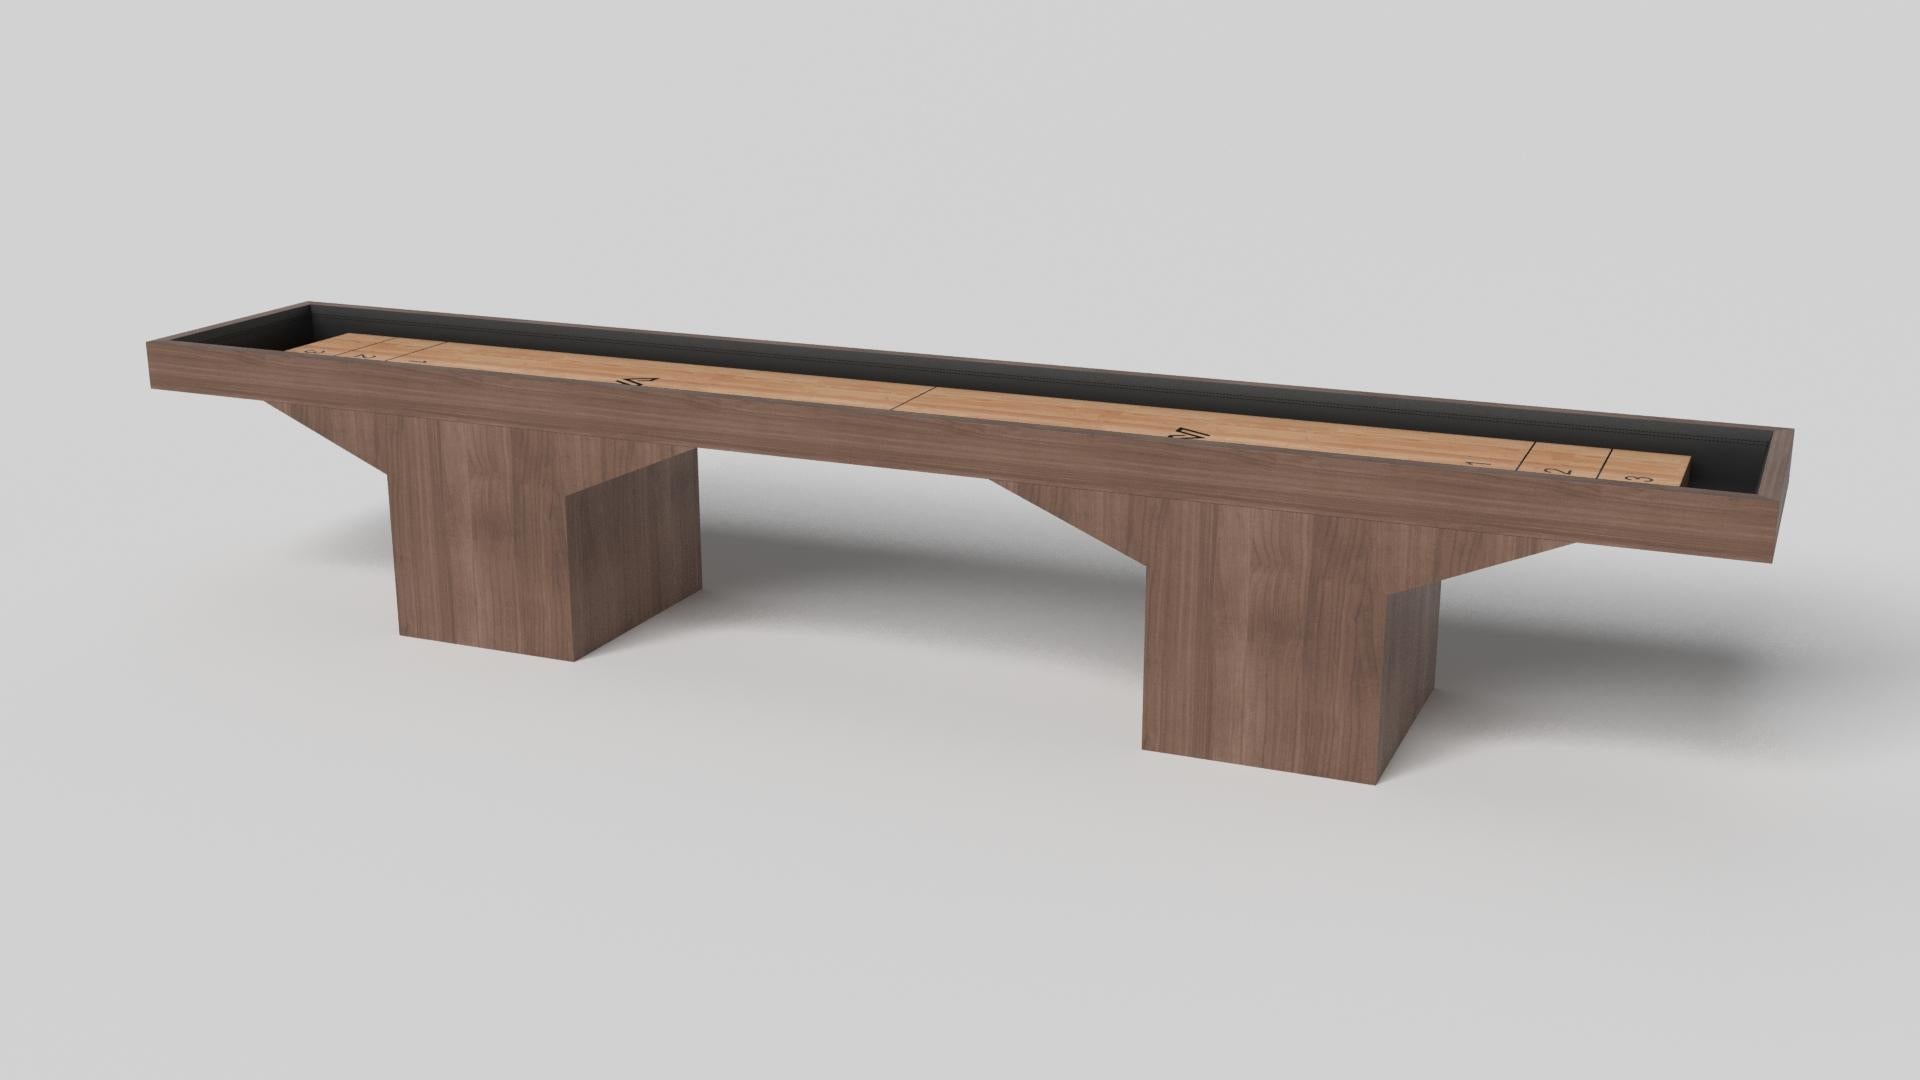 Minimalist design meets opulent elegance in the Trestle shuffleboard table. Detailed with a professional surface for endless game play, this contemporary table is expertly crafted. Square block legs give it a stark, geometric look that contributes